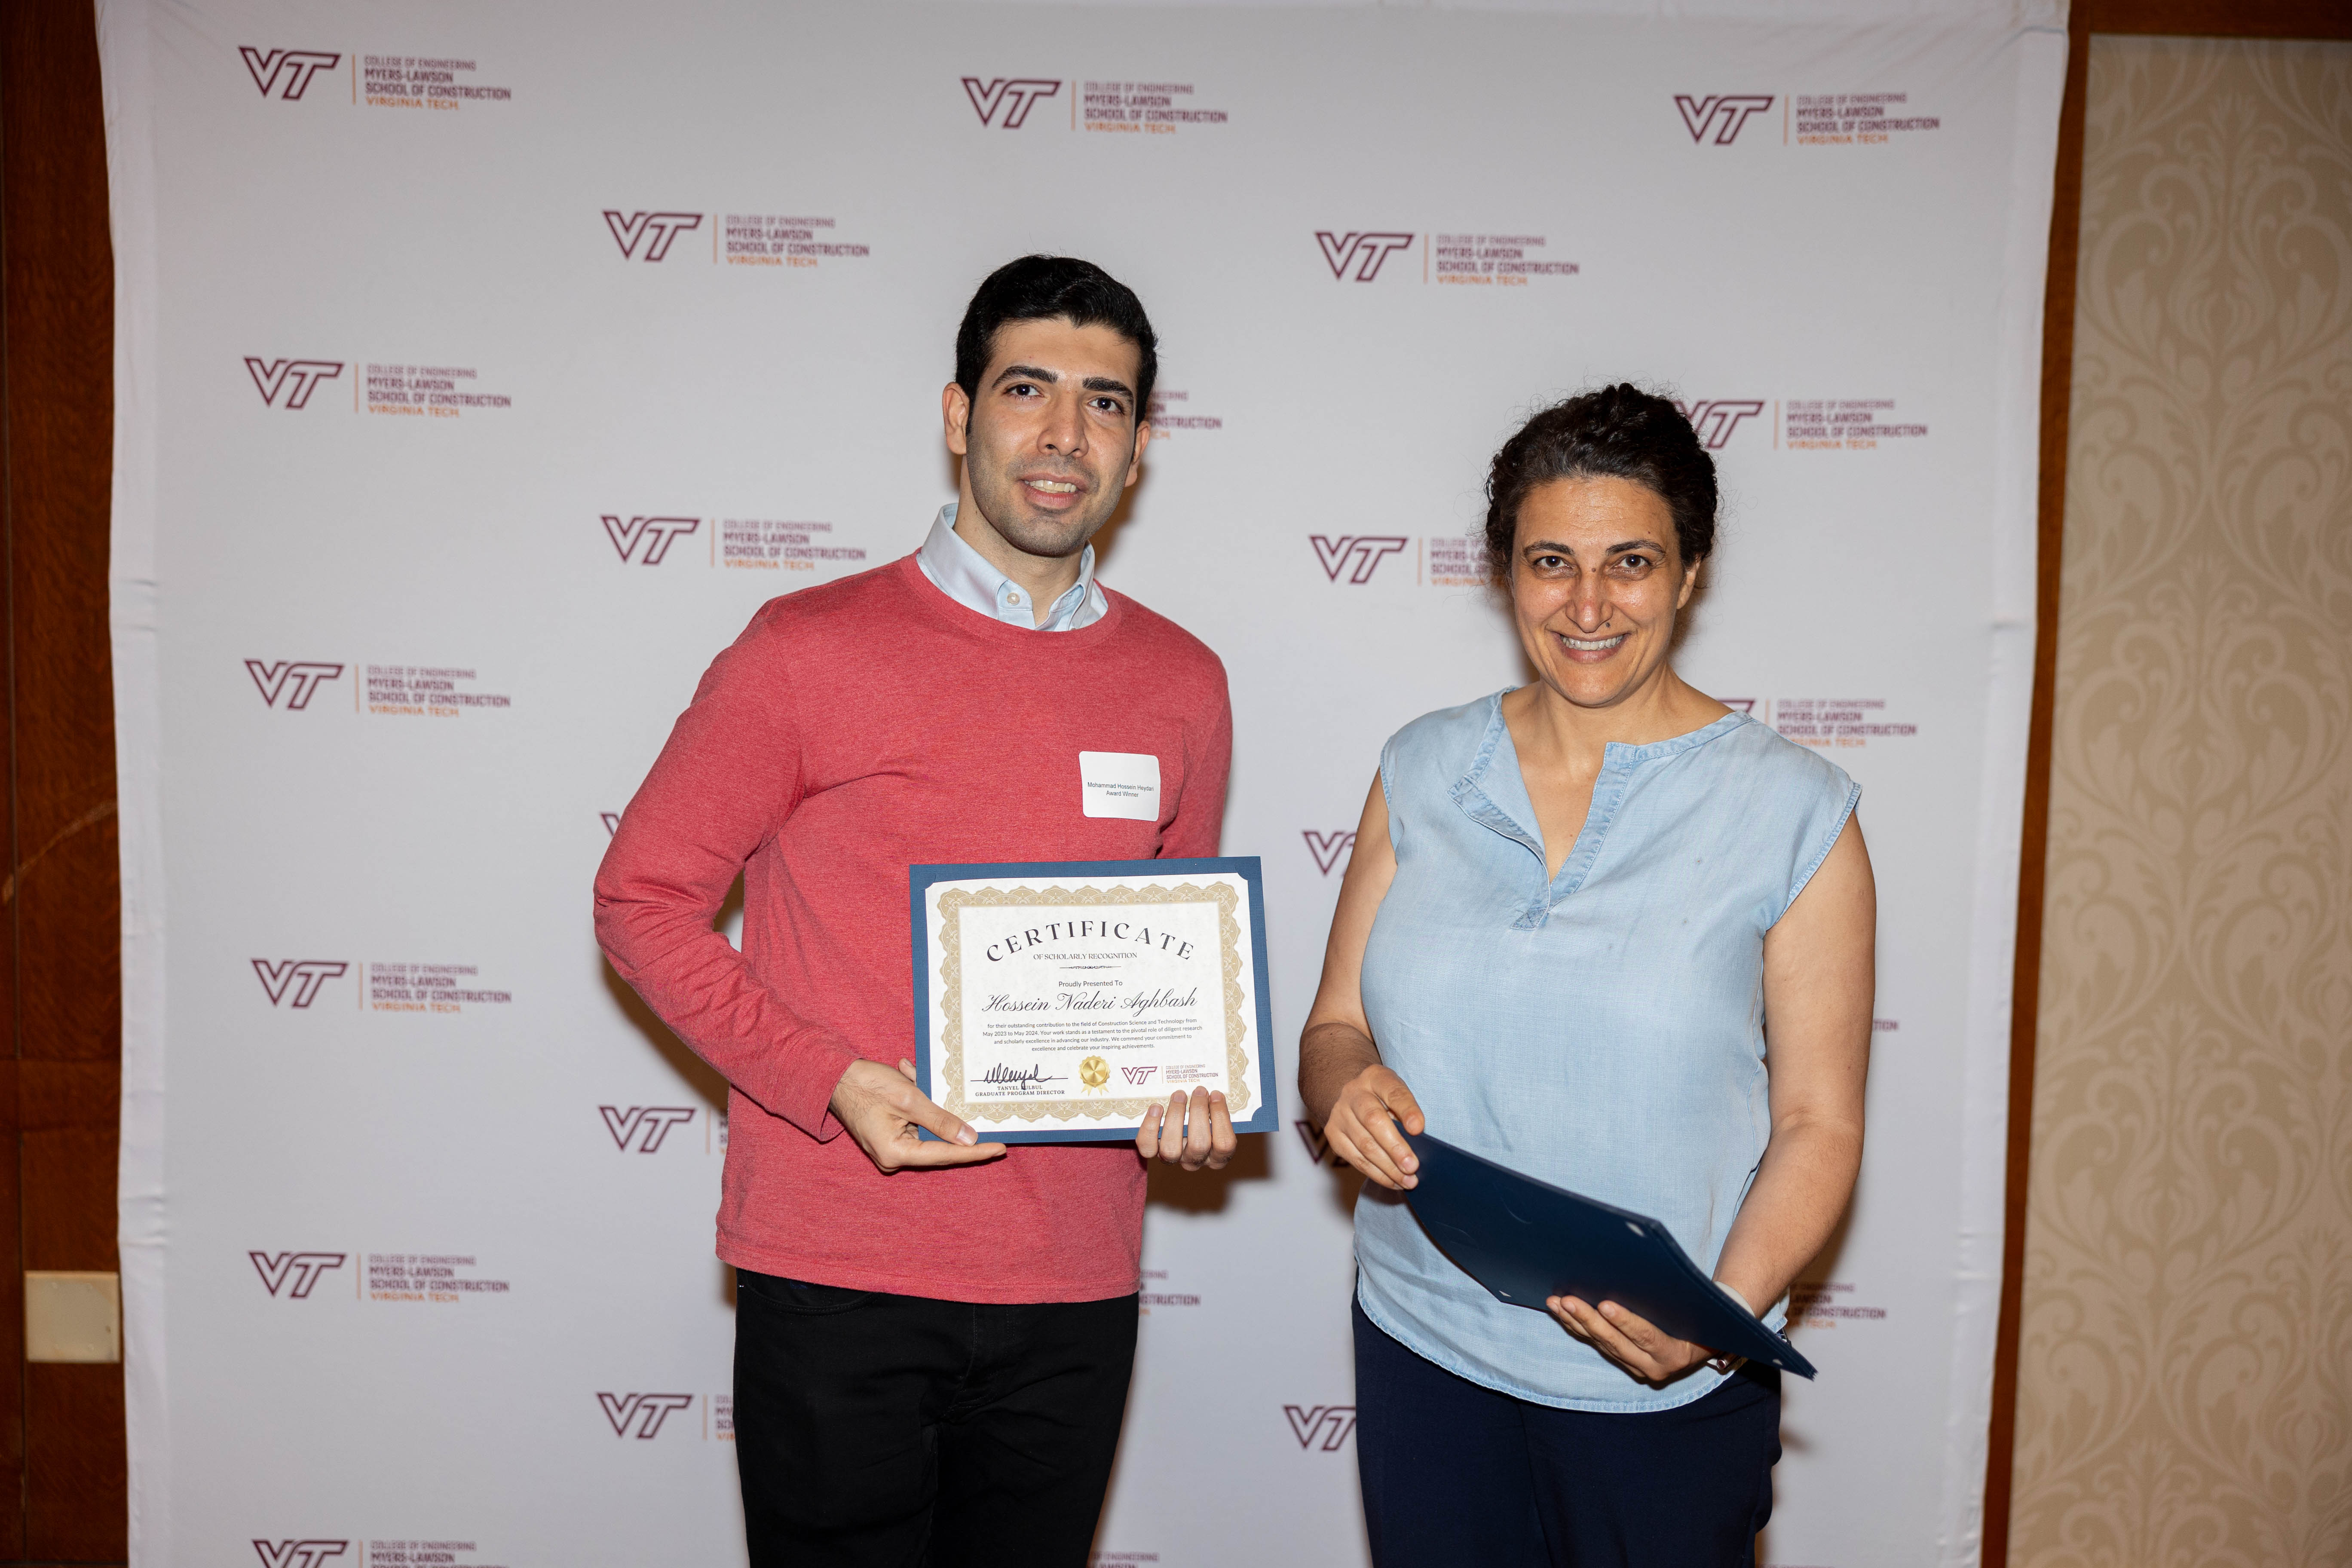 Hossein Naderi Aghbash (at left) and Tanyel Bulbul. Photo by Will Drew for Virginia Tech.